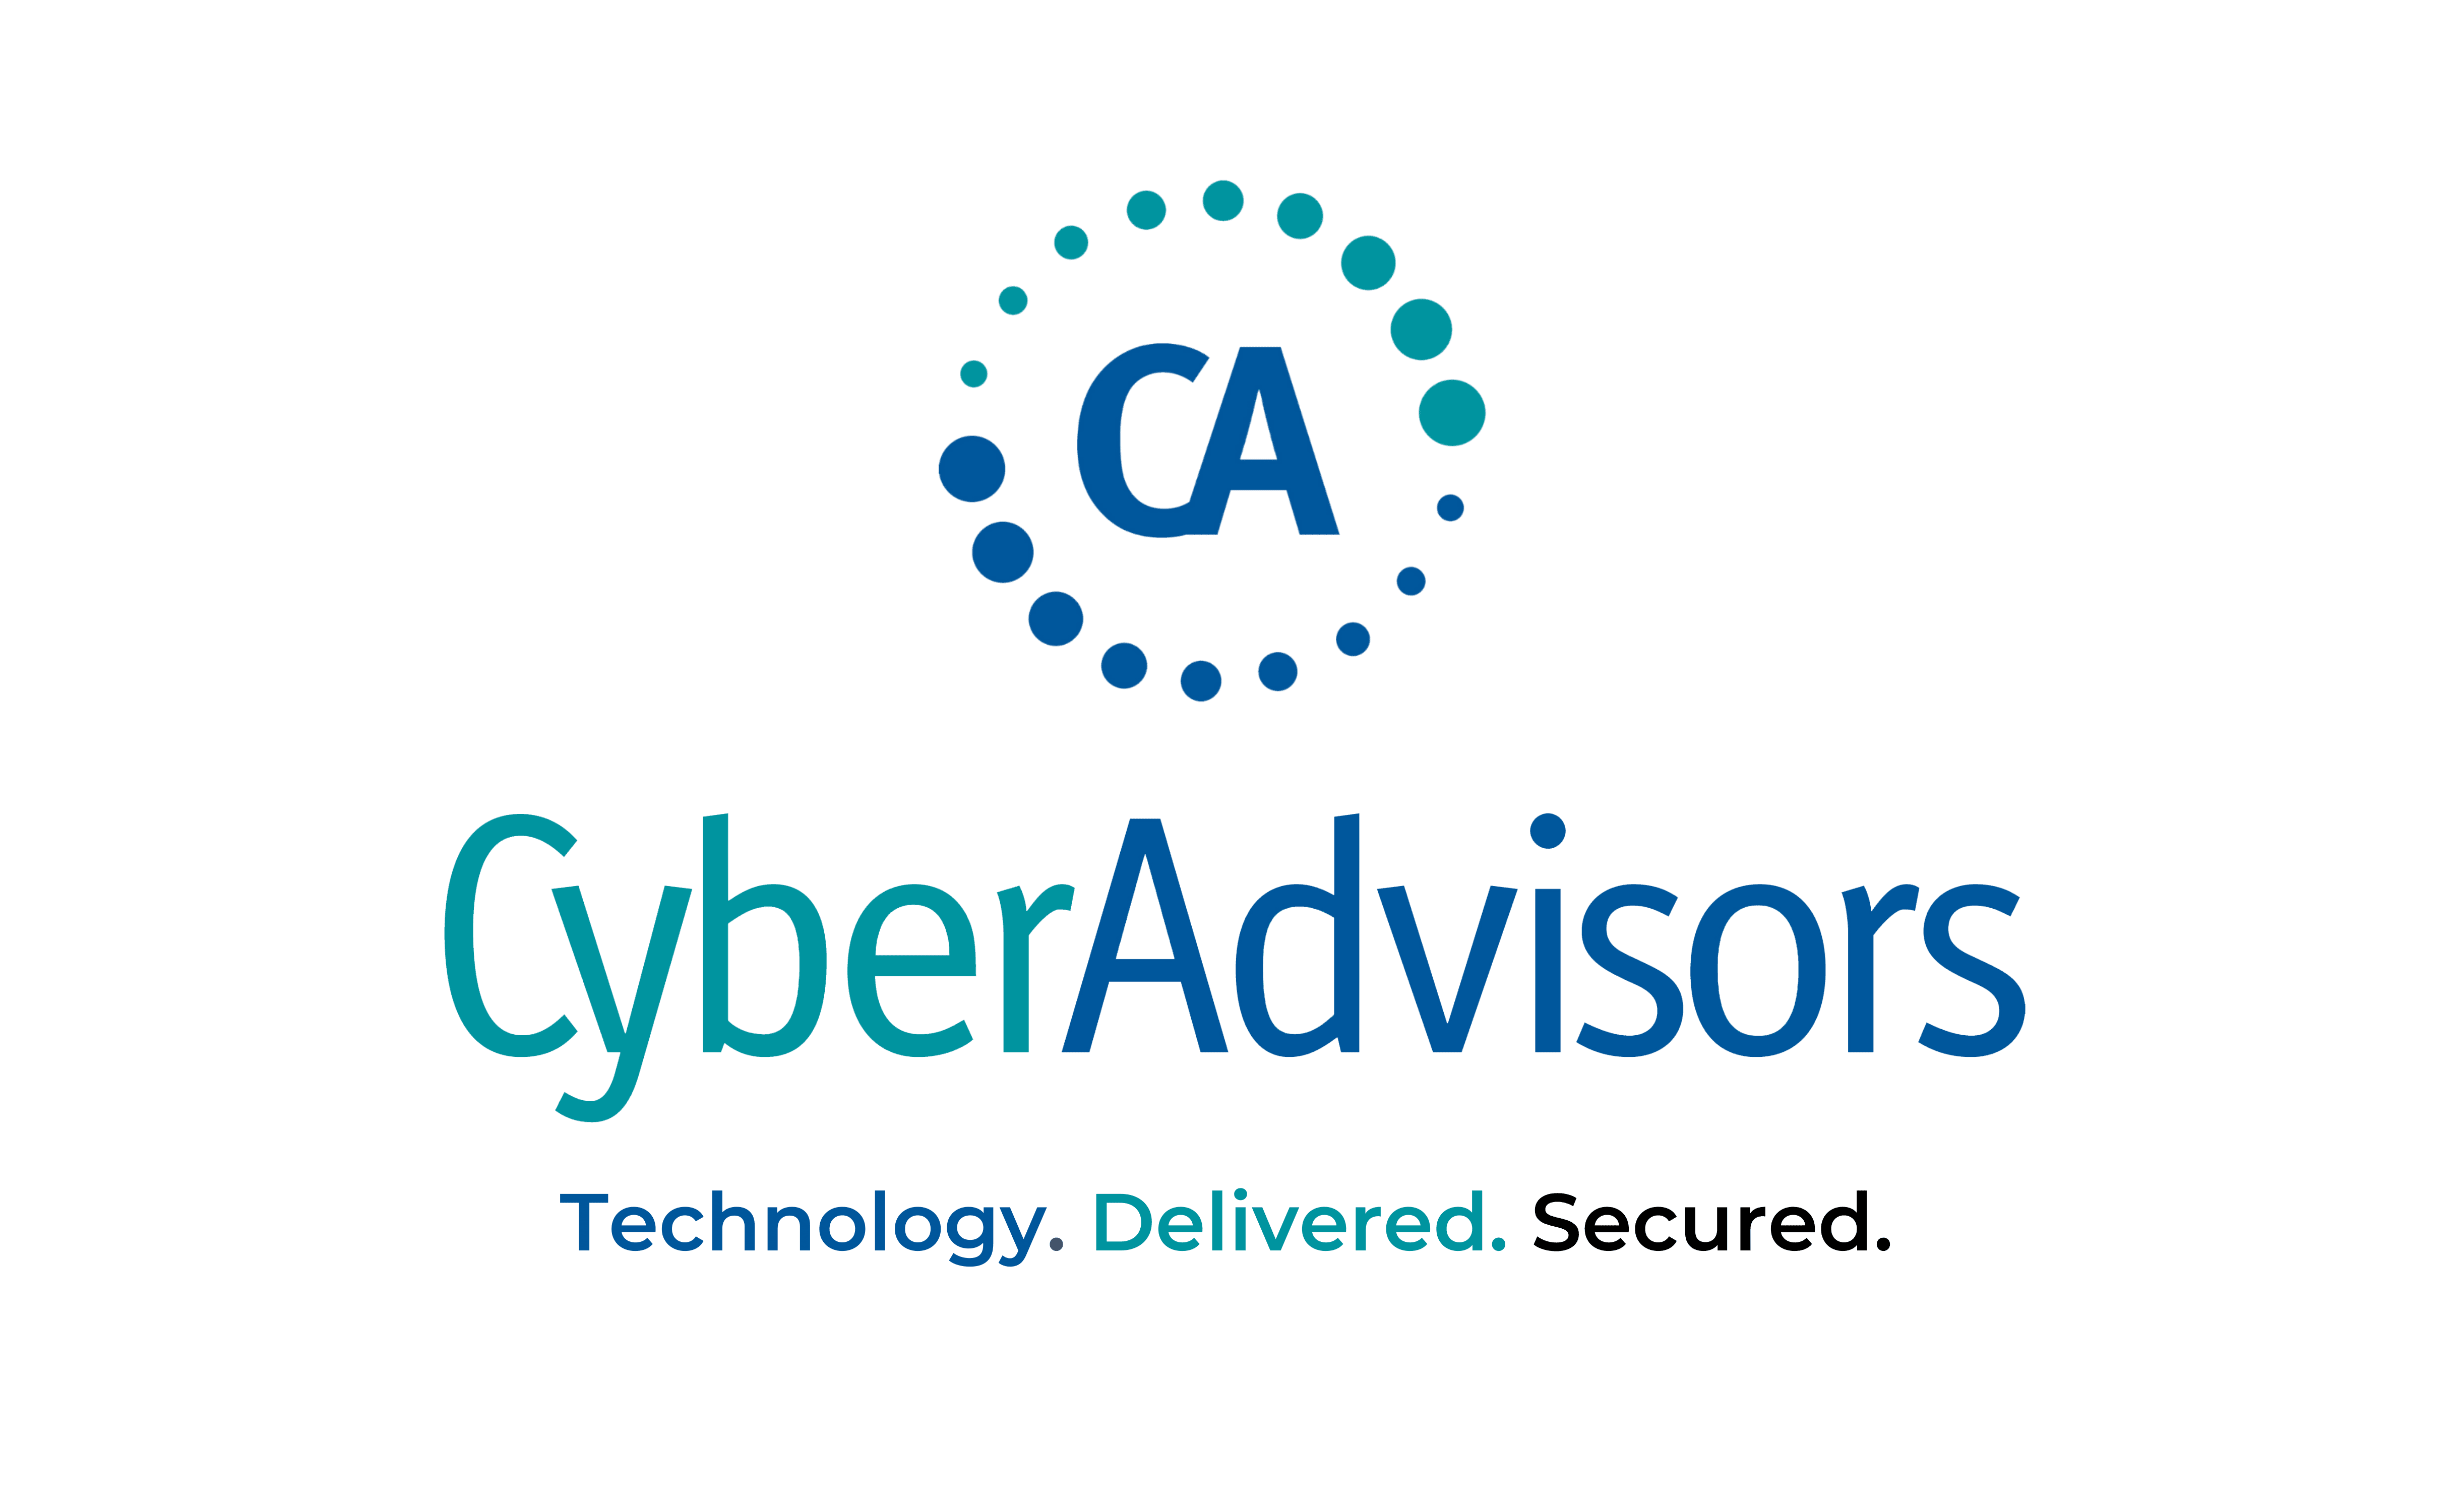 Press Release - Cyber Advisors Acquires Innovative Technology Partners